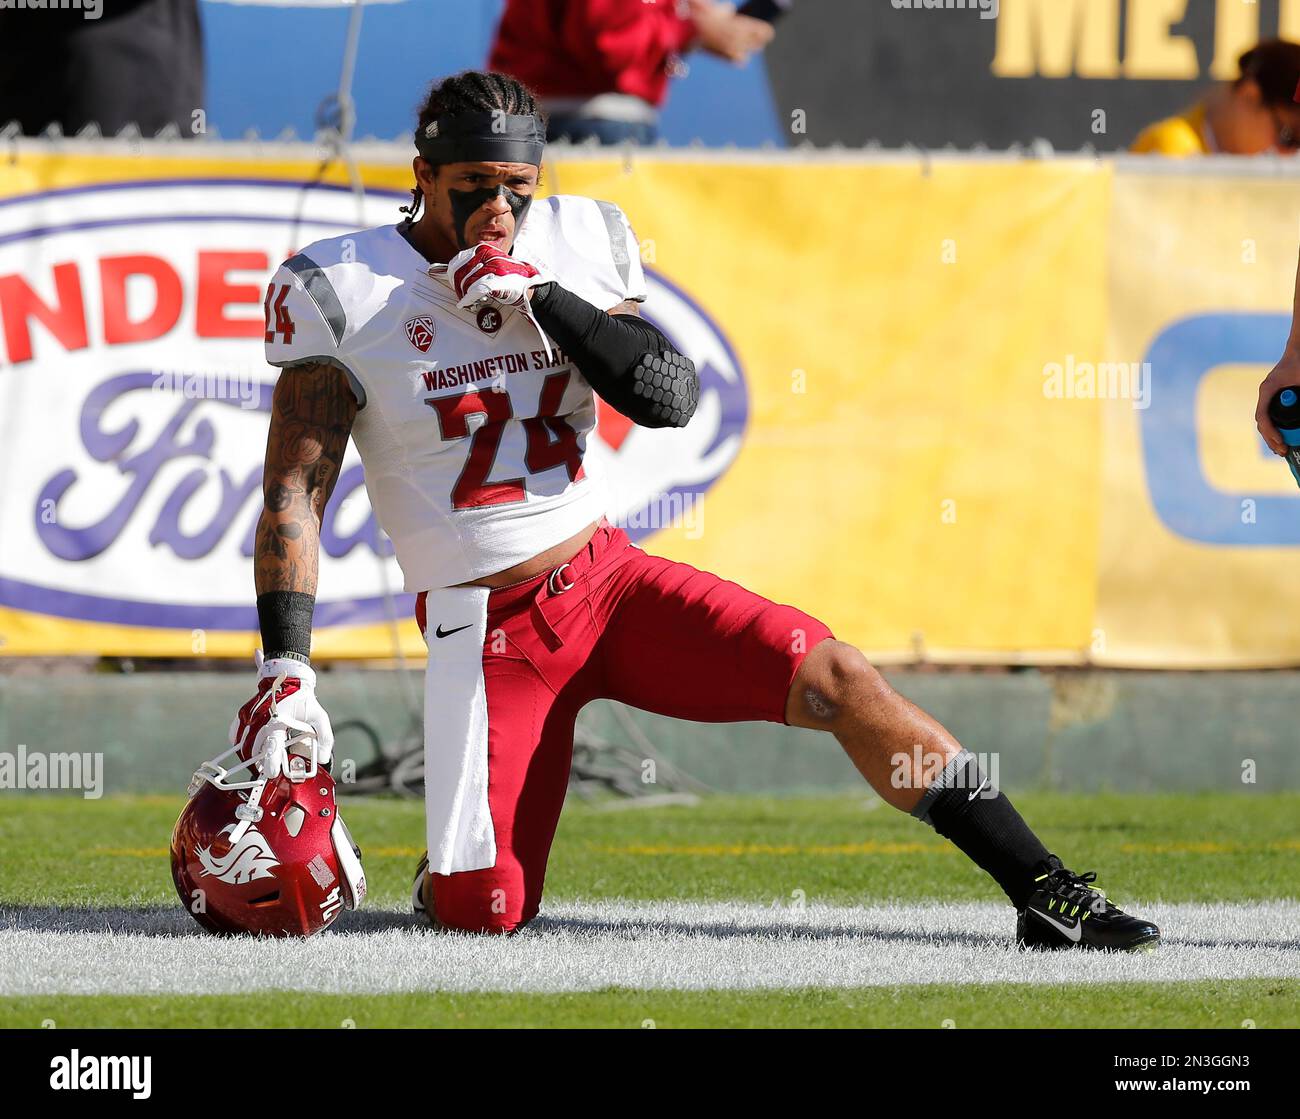 Washington State running back Theron West (24) in the first half during